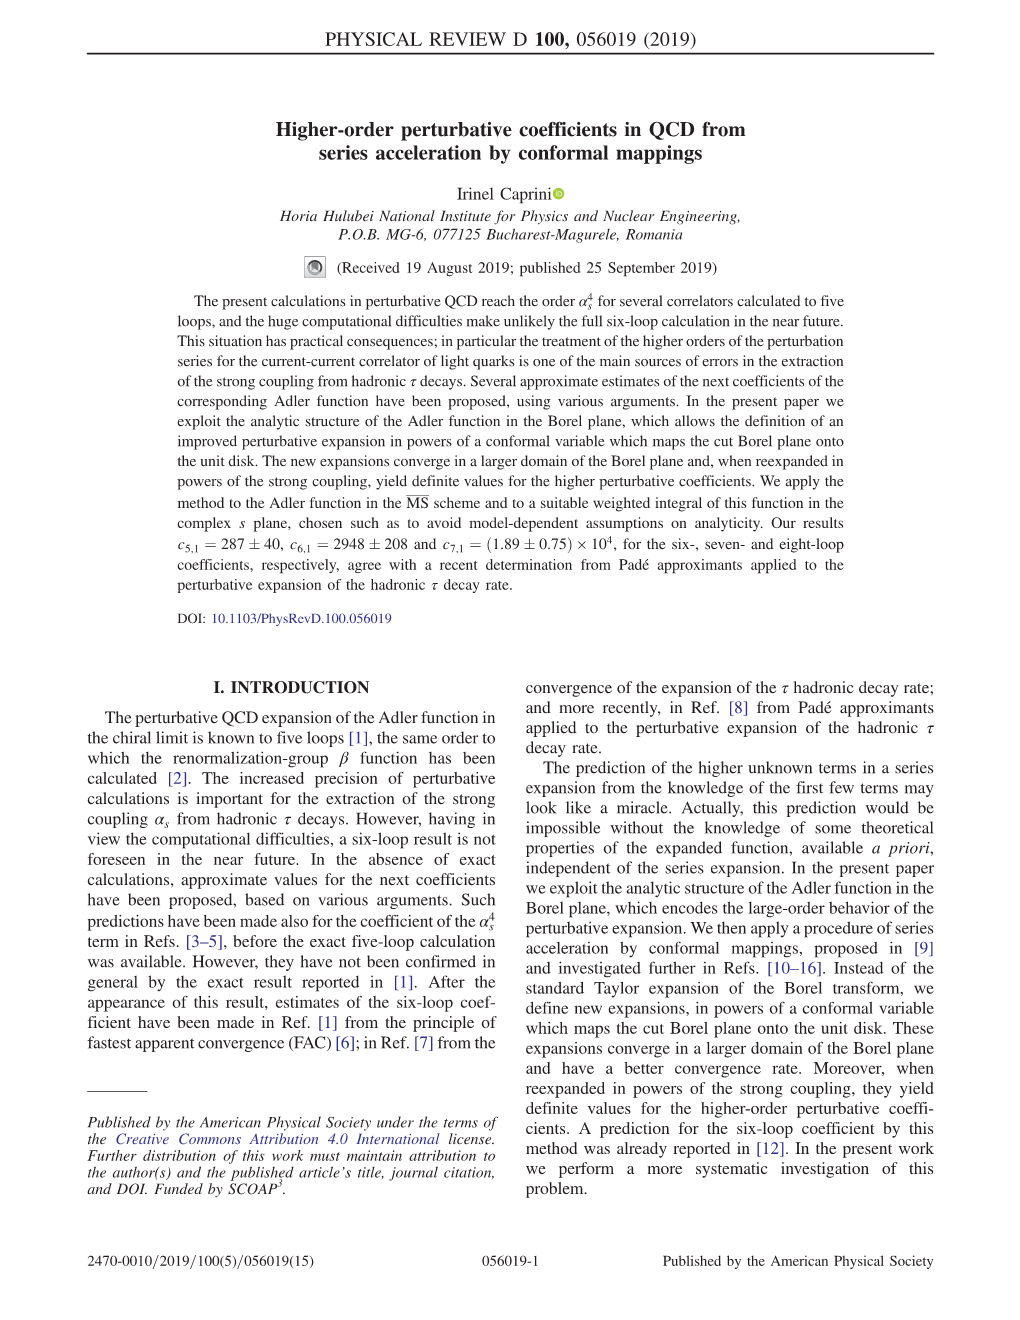 Higher-Order Perturbative Coefficients in QCD from Series Acceleration by Conformal Mappings